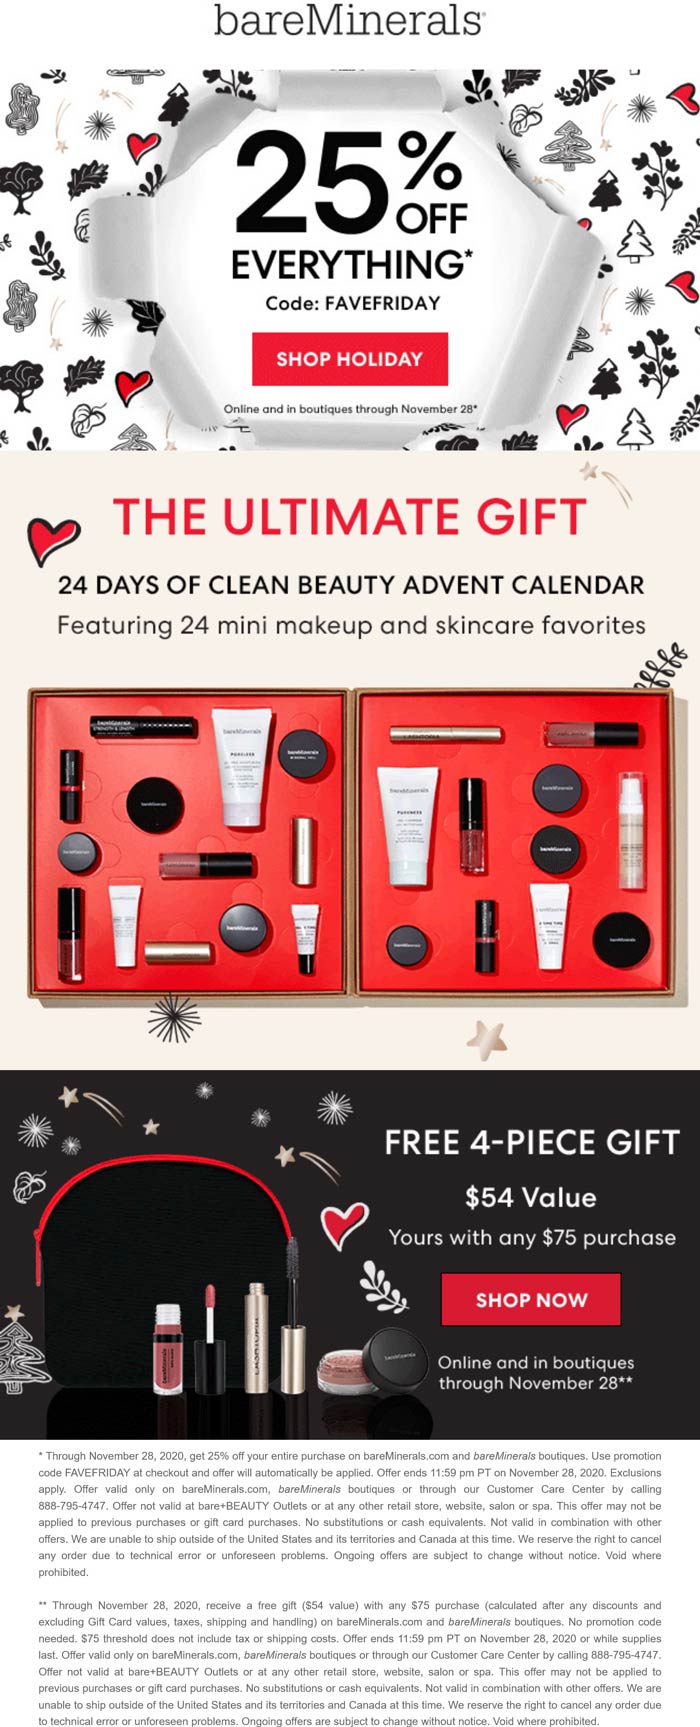 bareMinerals stores Coupon  25% off everything at bareMinerals via promo code FAVEFRIDAY #bareminerals 